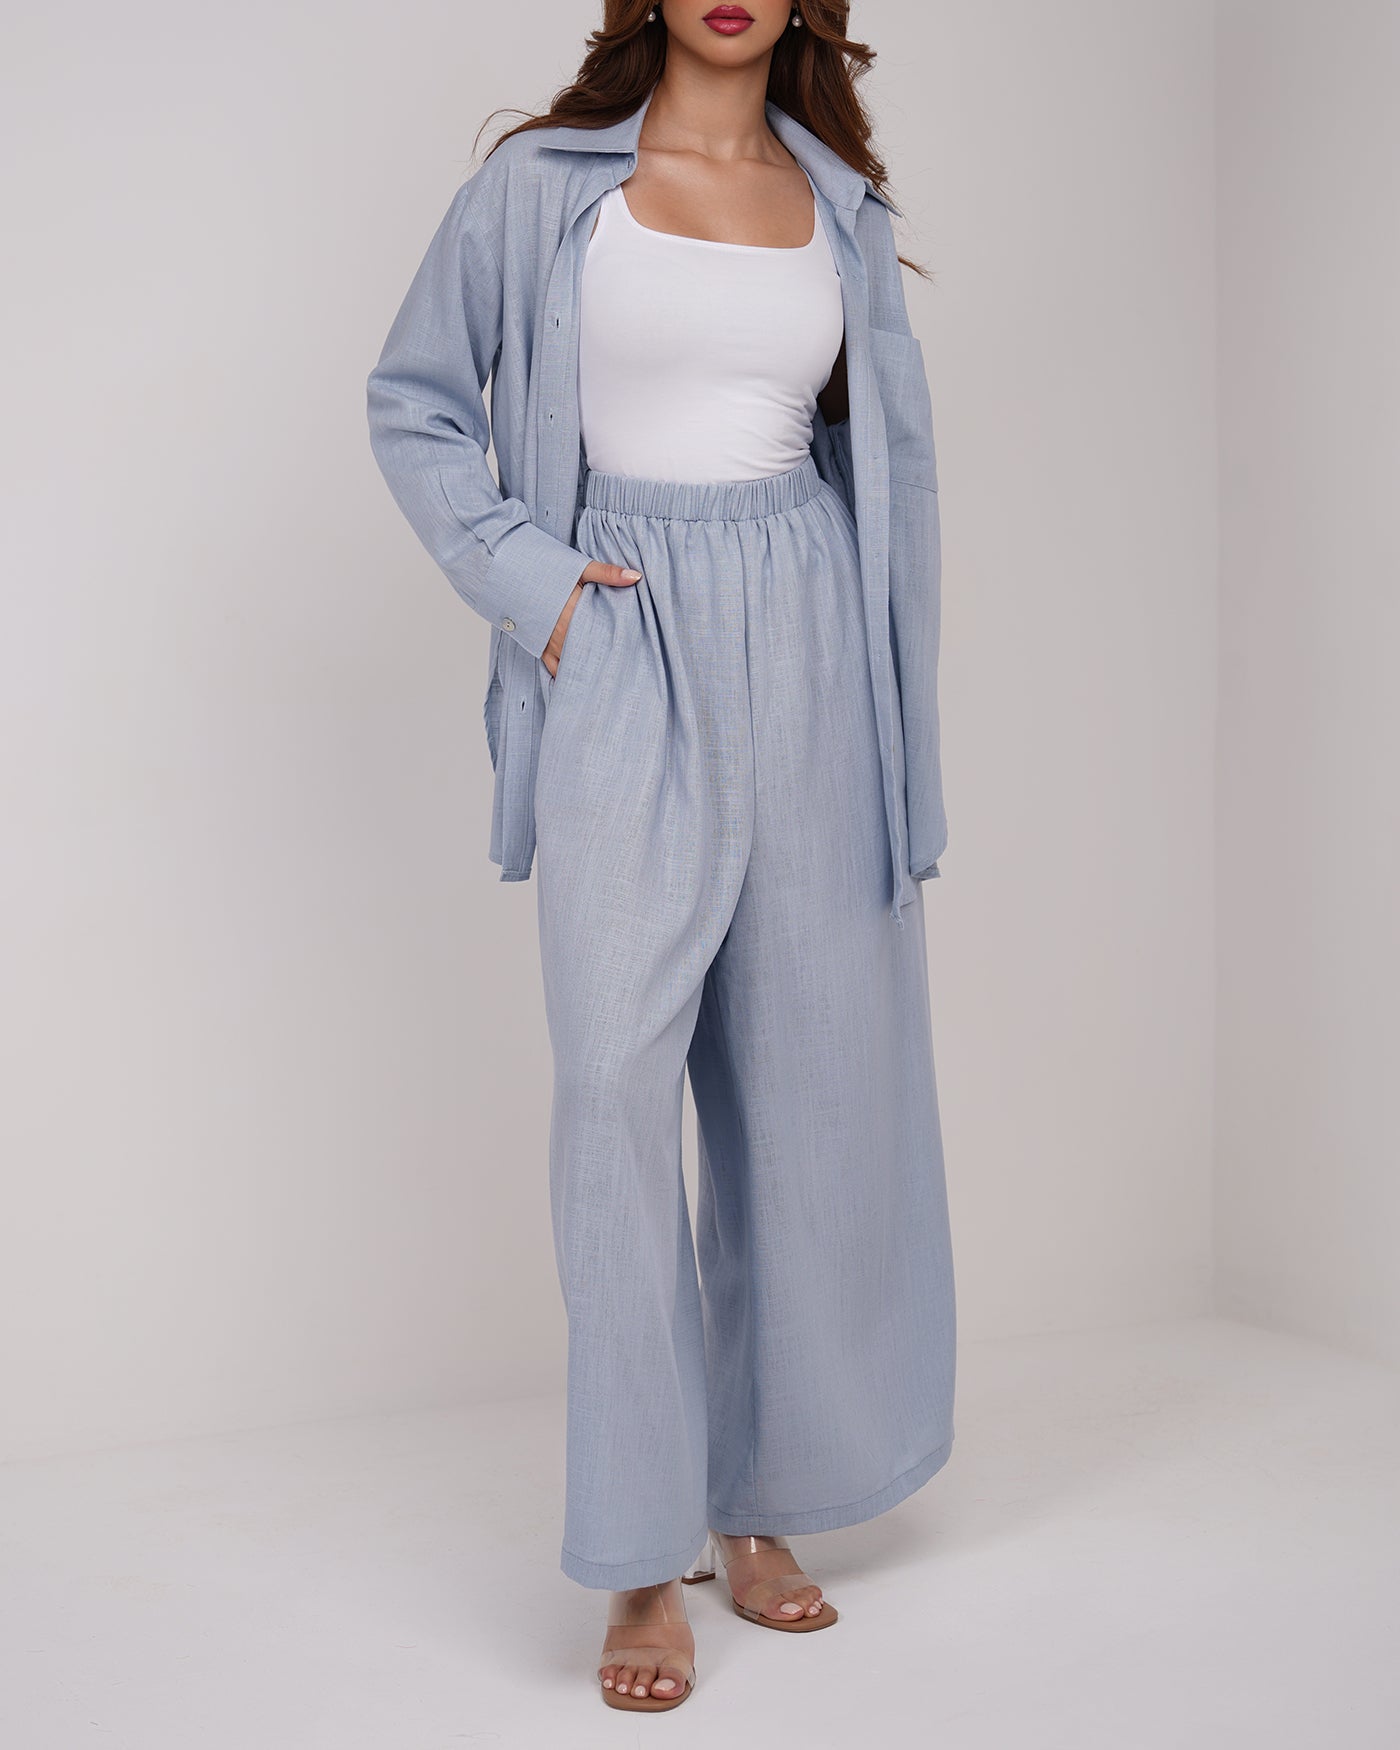 Ballad blue buttons up shirt with culottes trousers